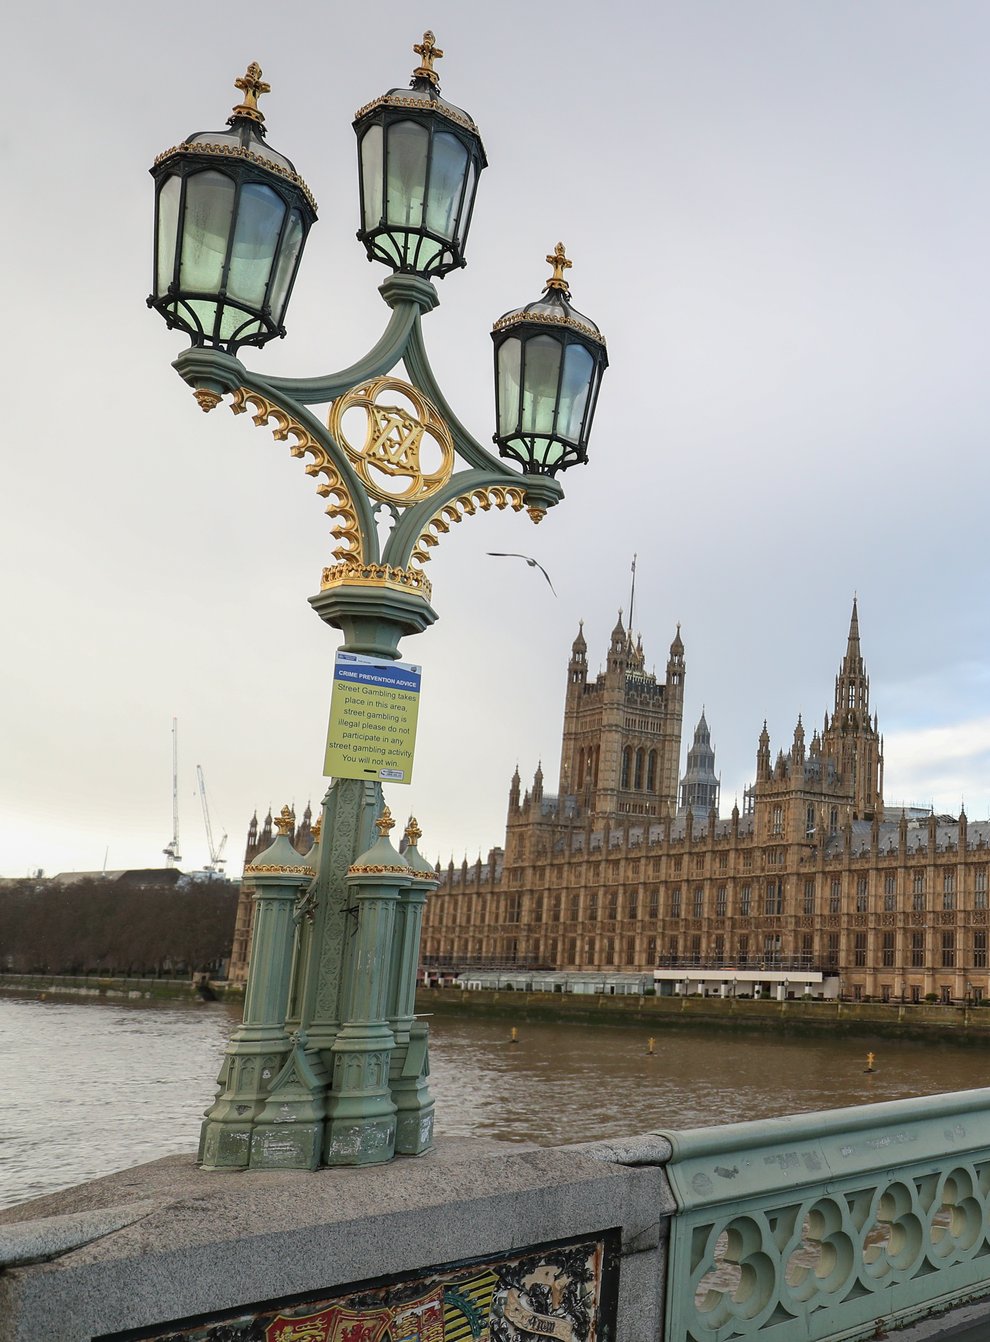 A quiet Westminster bridge by the Houses of Parliament